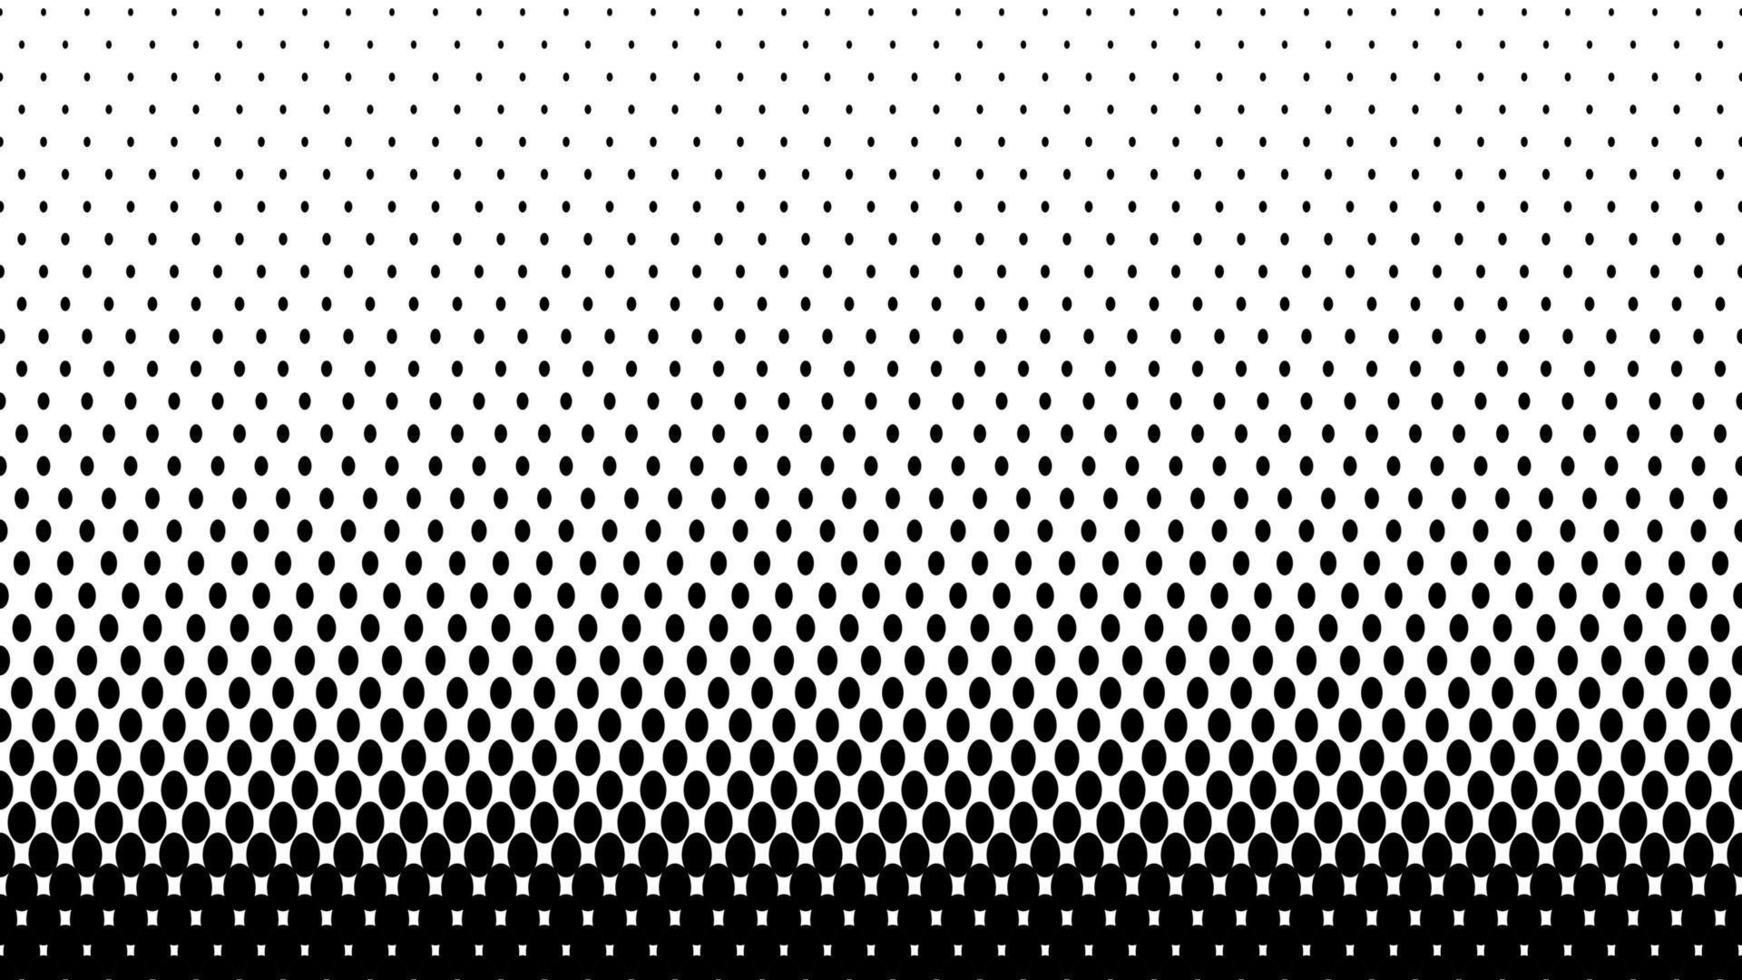 Black and white halftone geometrical background with ovals, circles. vector